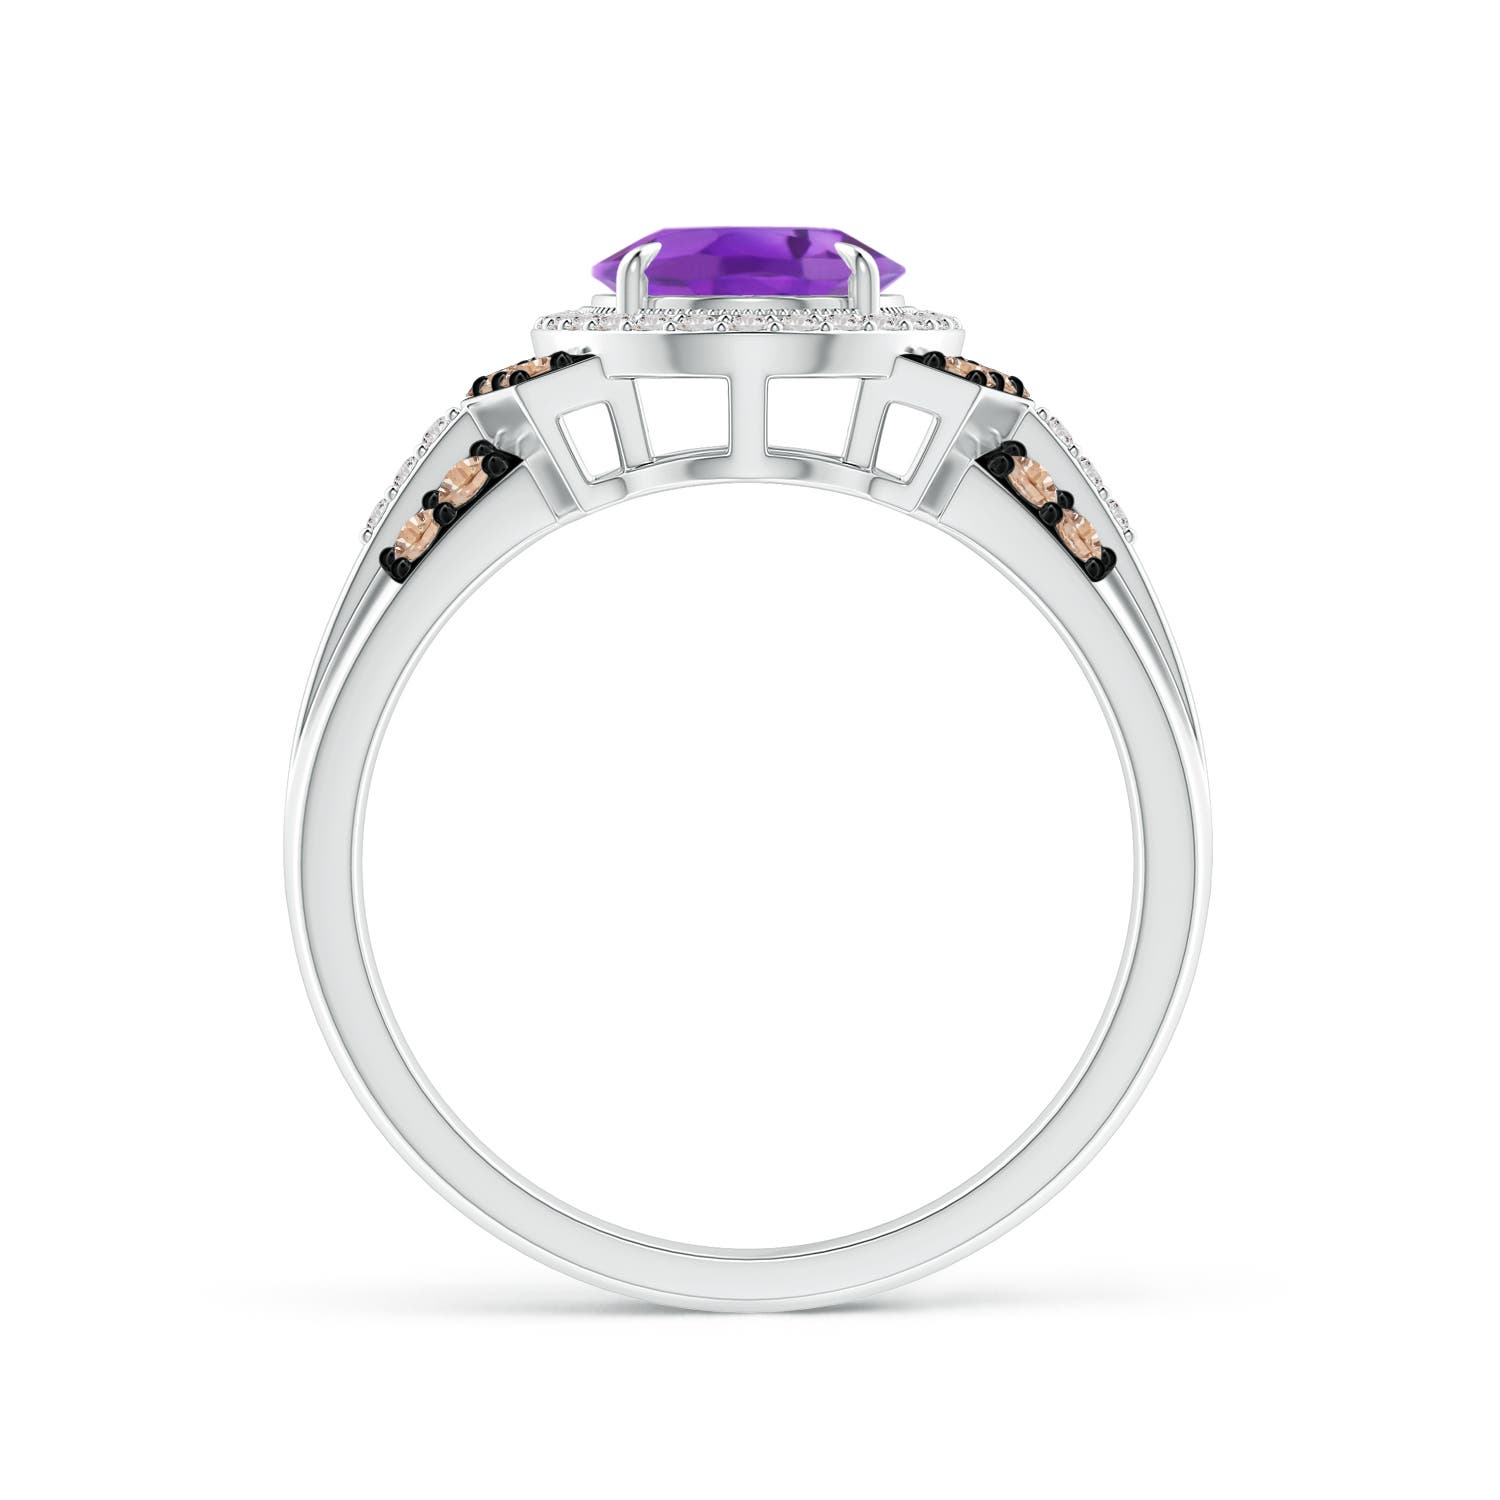 AA - Amethyst / 2.02 CT / 14 KT White Gold